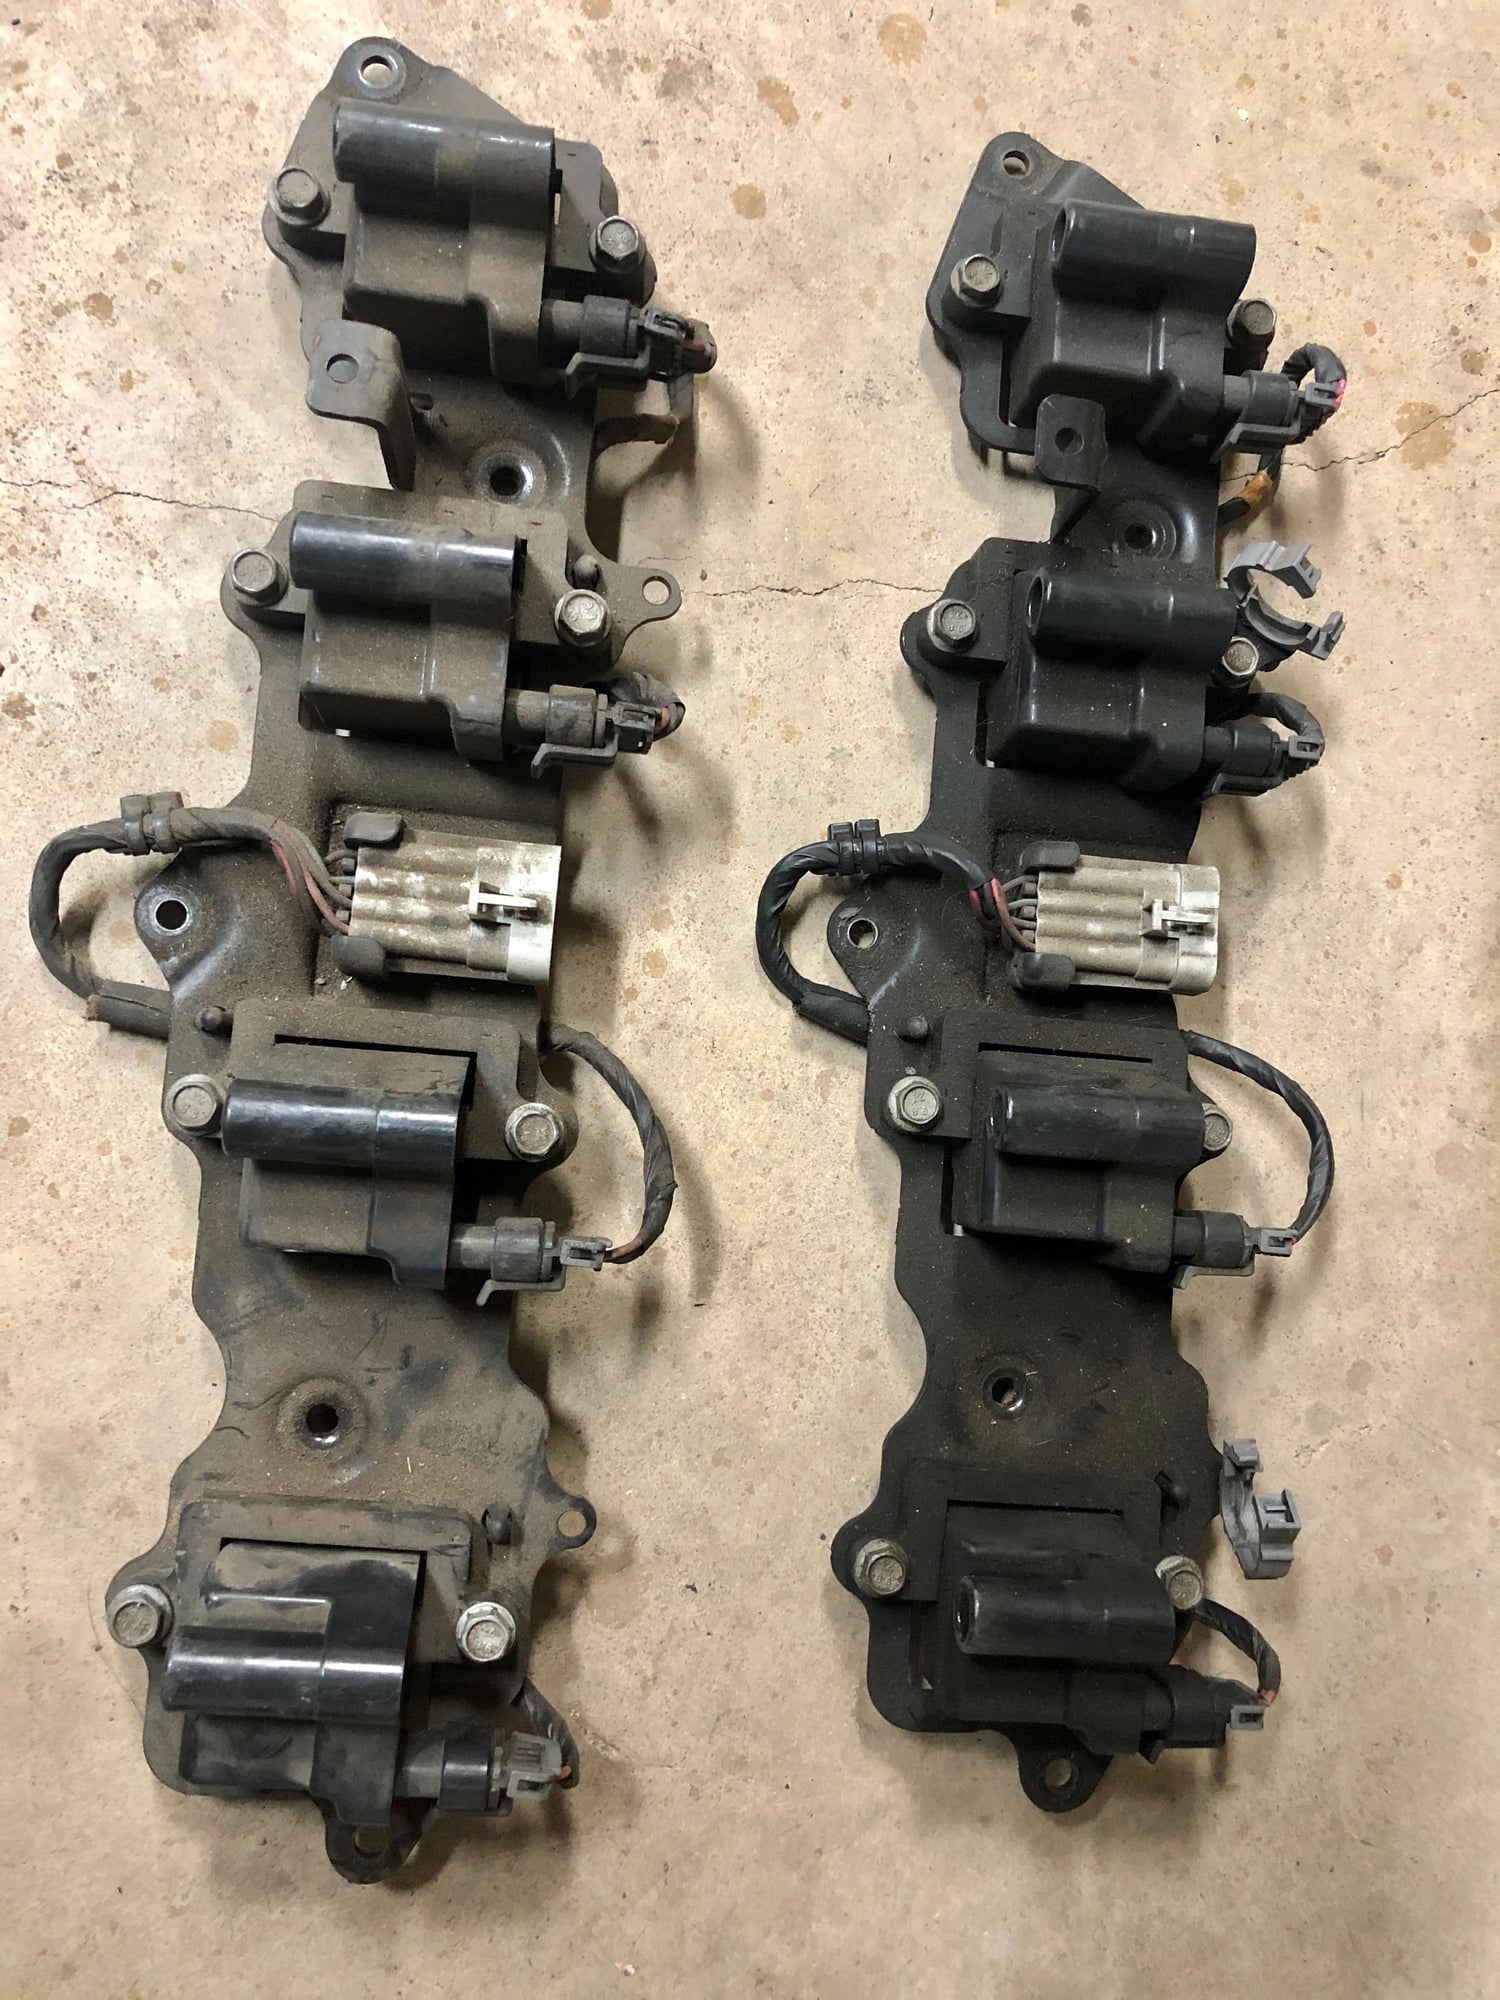  - Coils with brackets and harness - Denton, TX 76210, United States